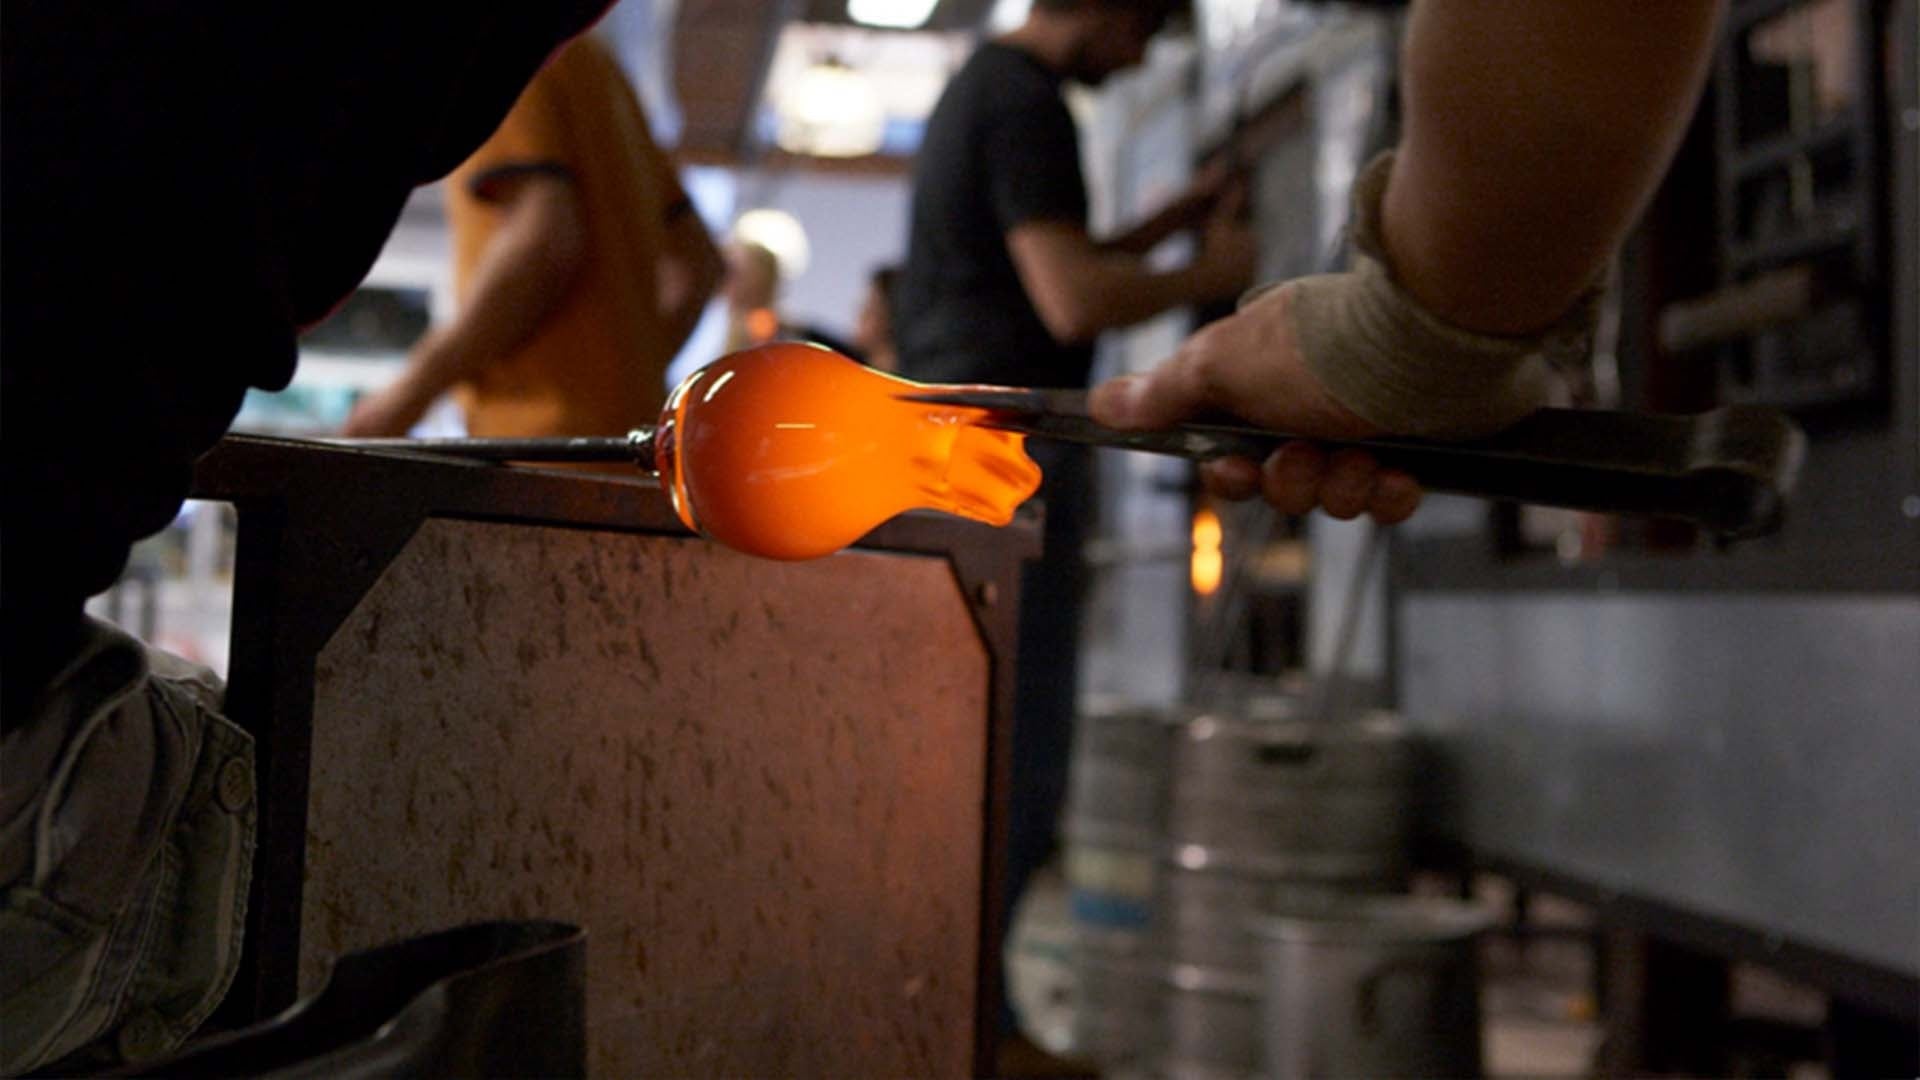 pulling hot glass, crafting hand-blown glass votive candle holders